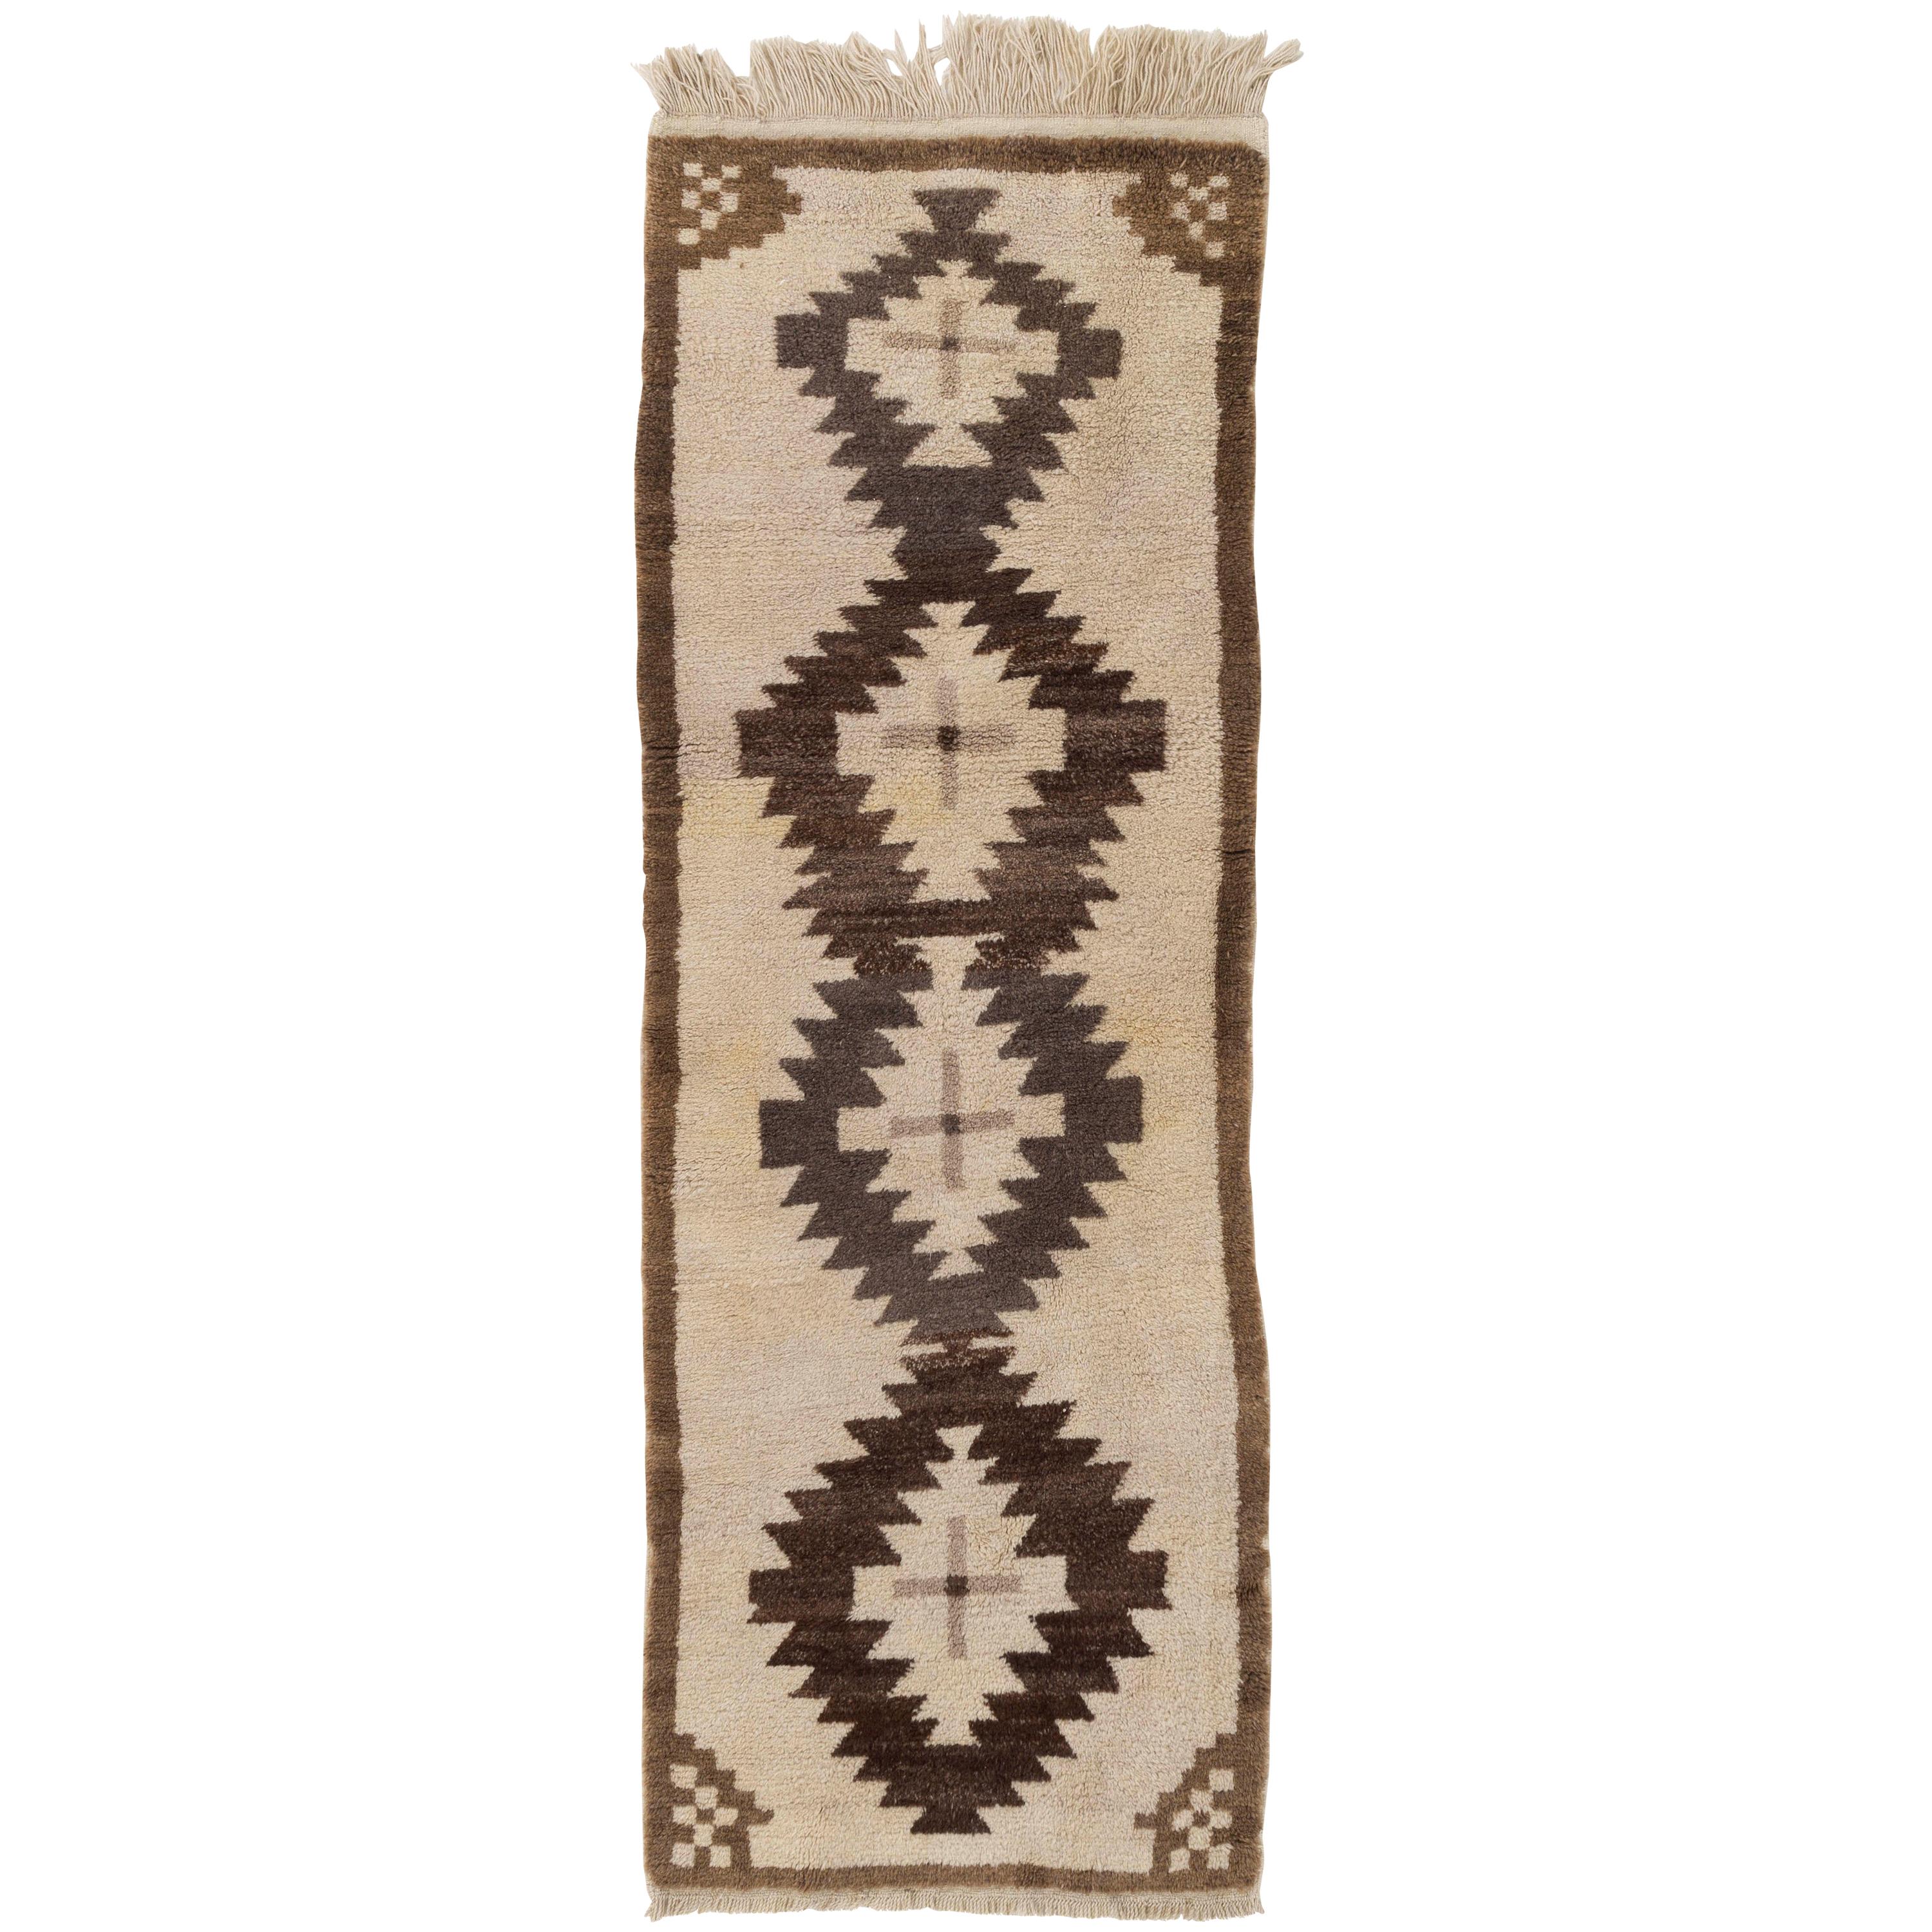 2.7x7.3 ft Vintage Tulu Runner Rug. 100% Natural Wool. Custom Options Available For Sale